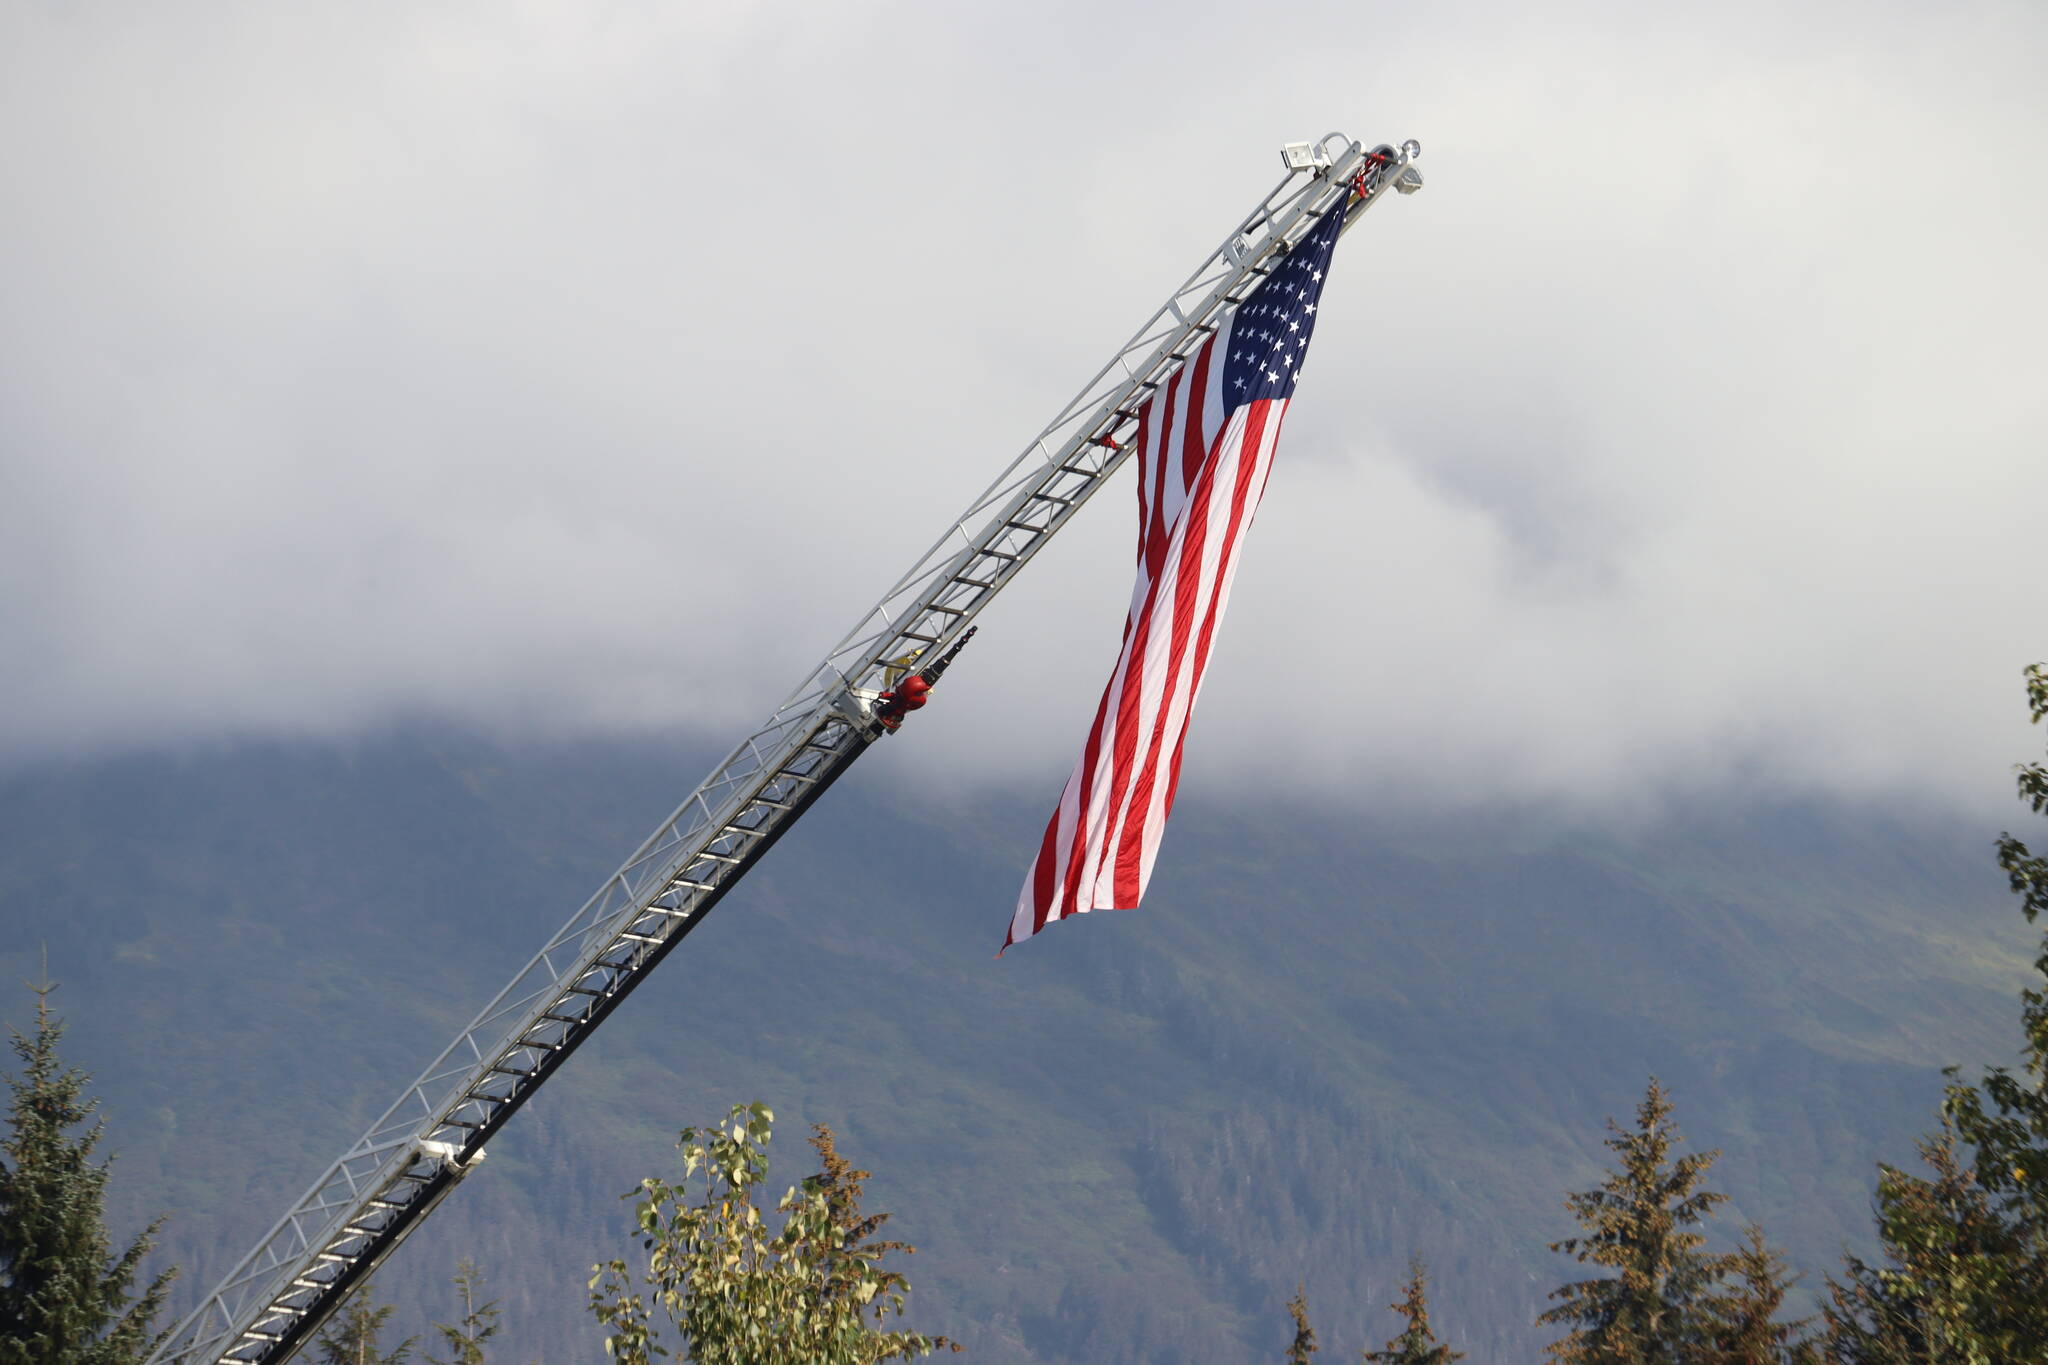 Capital City Fire and Rescue raised the flag during the rendition of “Amazing Grace,” performed by Scott Marnon of the City of Juneau Pipe Band. (Jonson Kuhn / Juneau Empire)